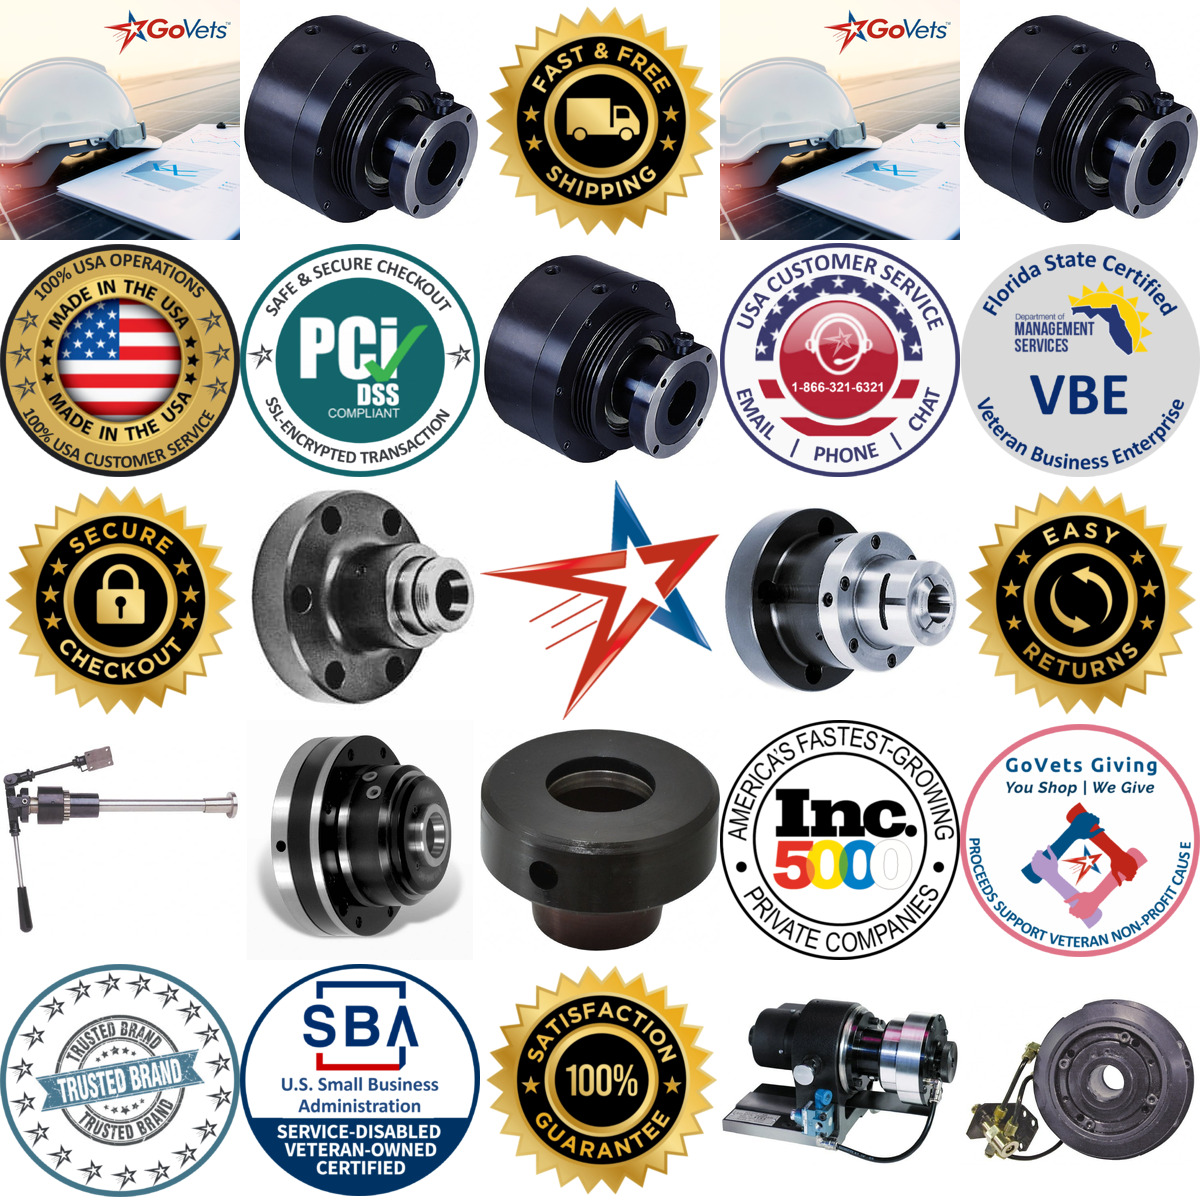 A selection of Collet Closers and Accessories products on GoVets